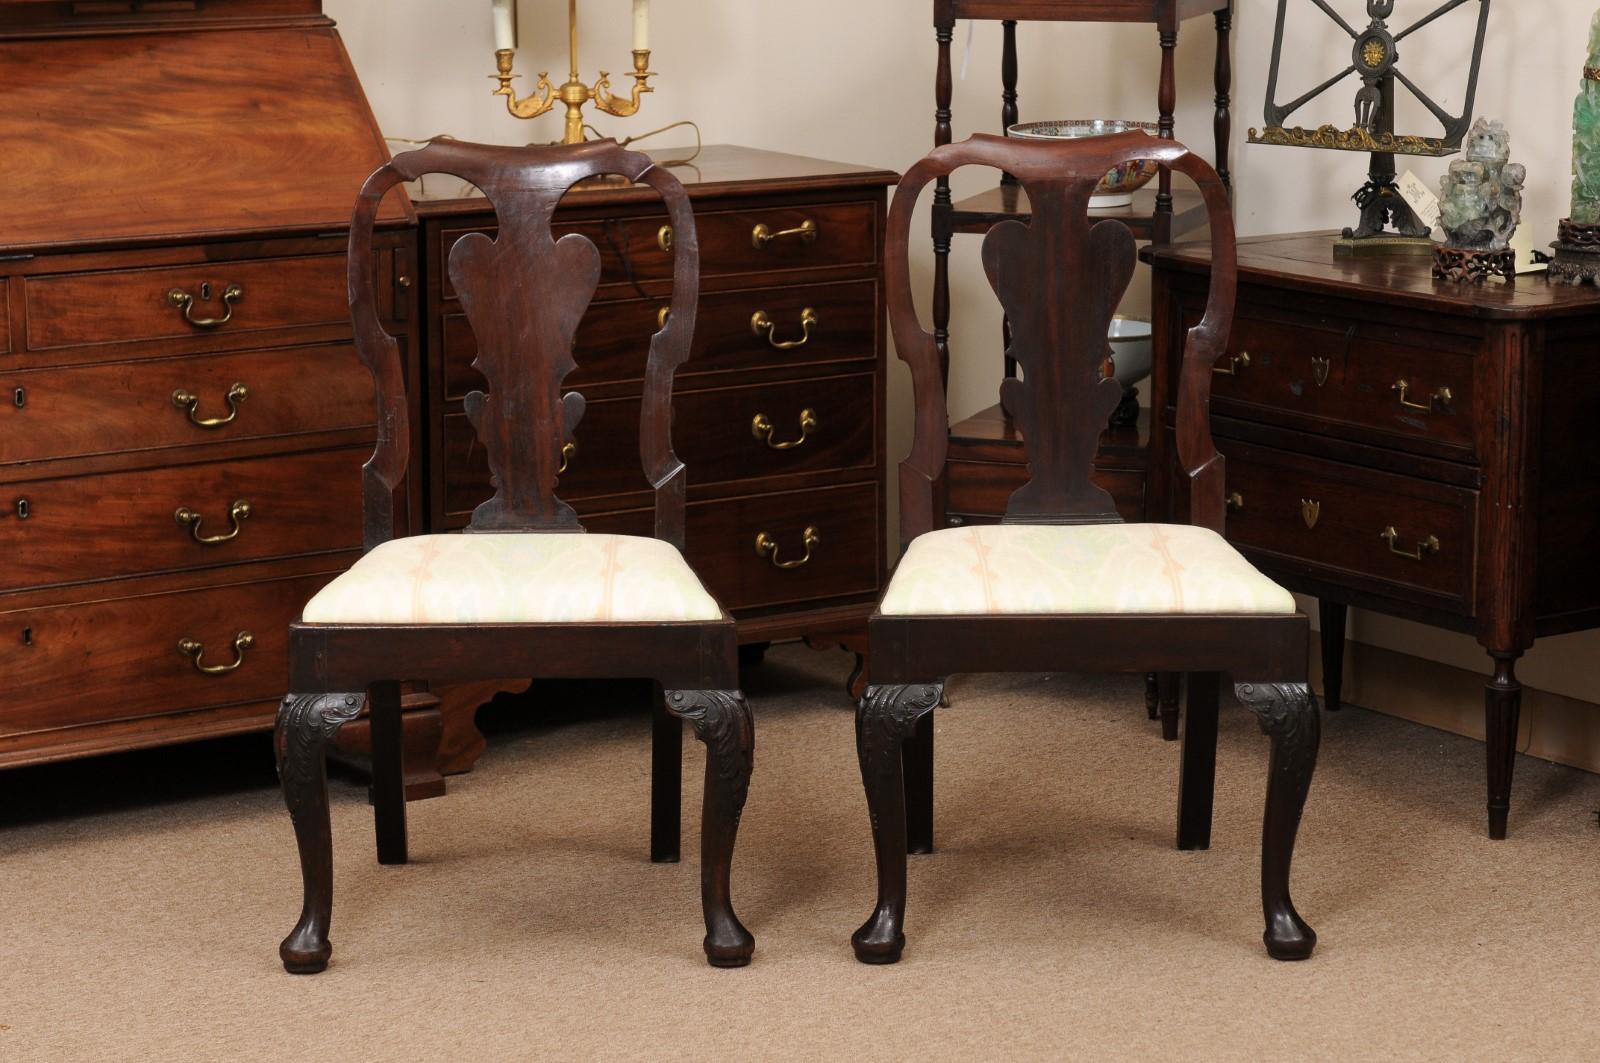 Pair of Queen Anne Walnut Side Chairs, 18th Century England For Sale 8